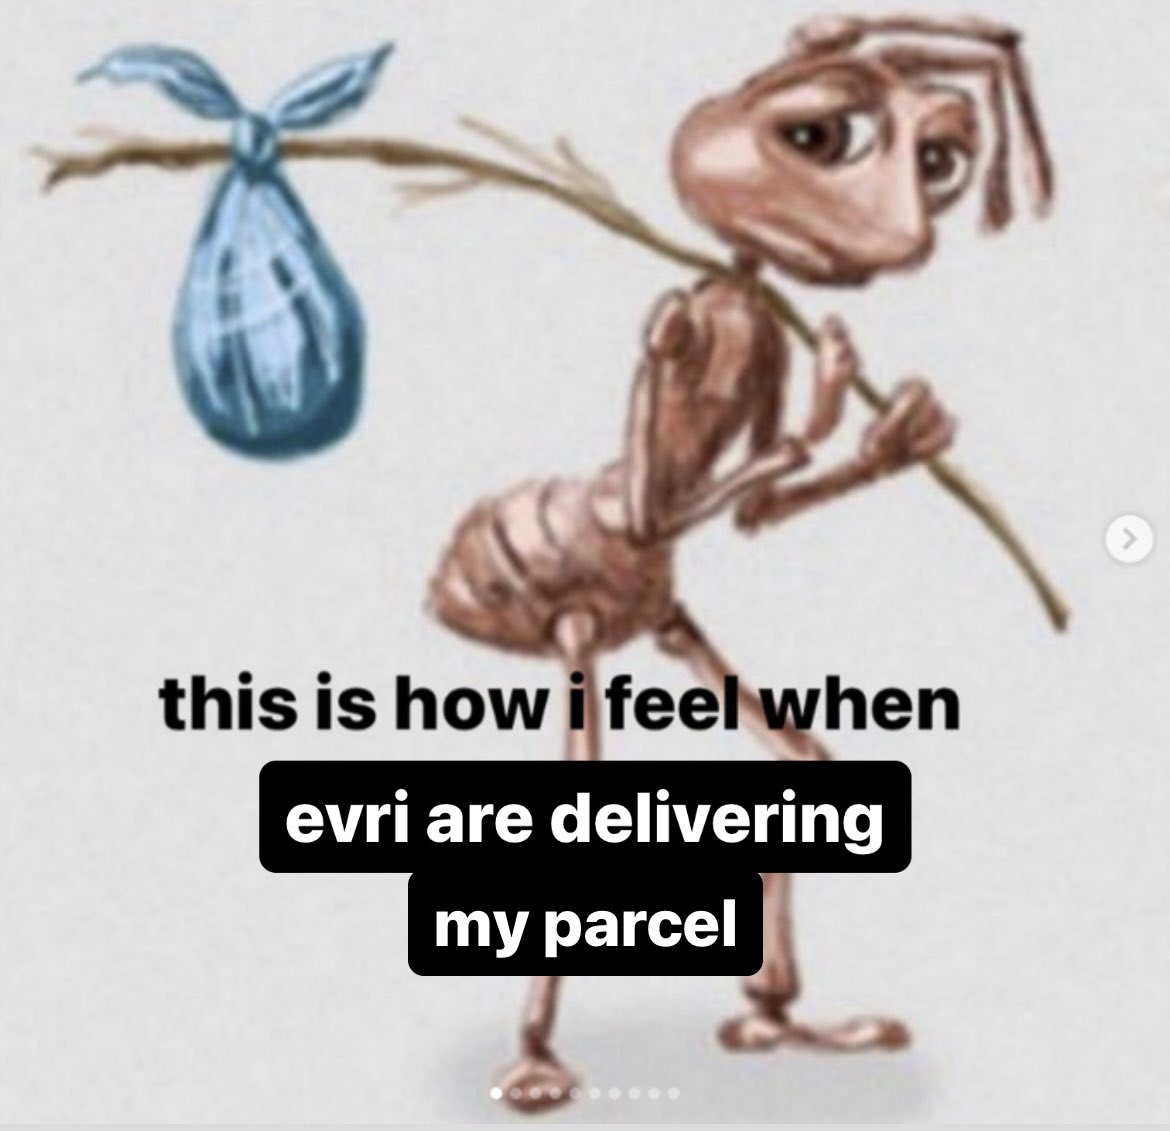 me when evri have my parcel rn